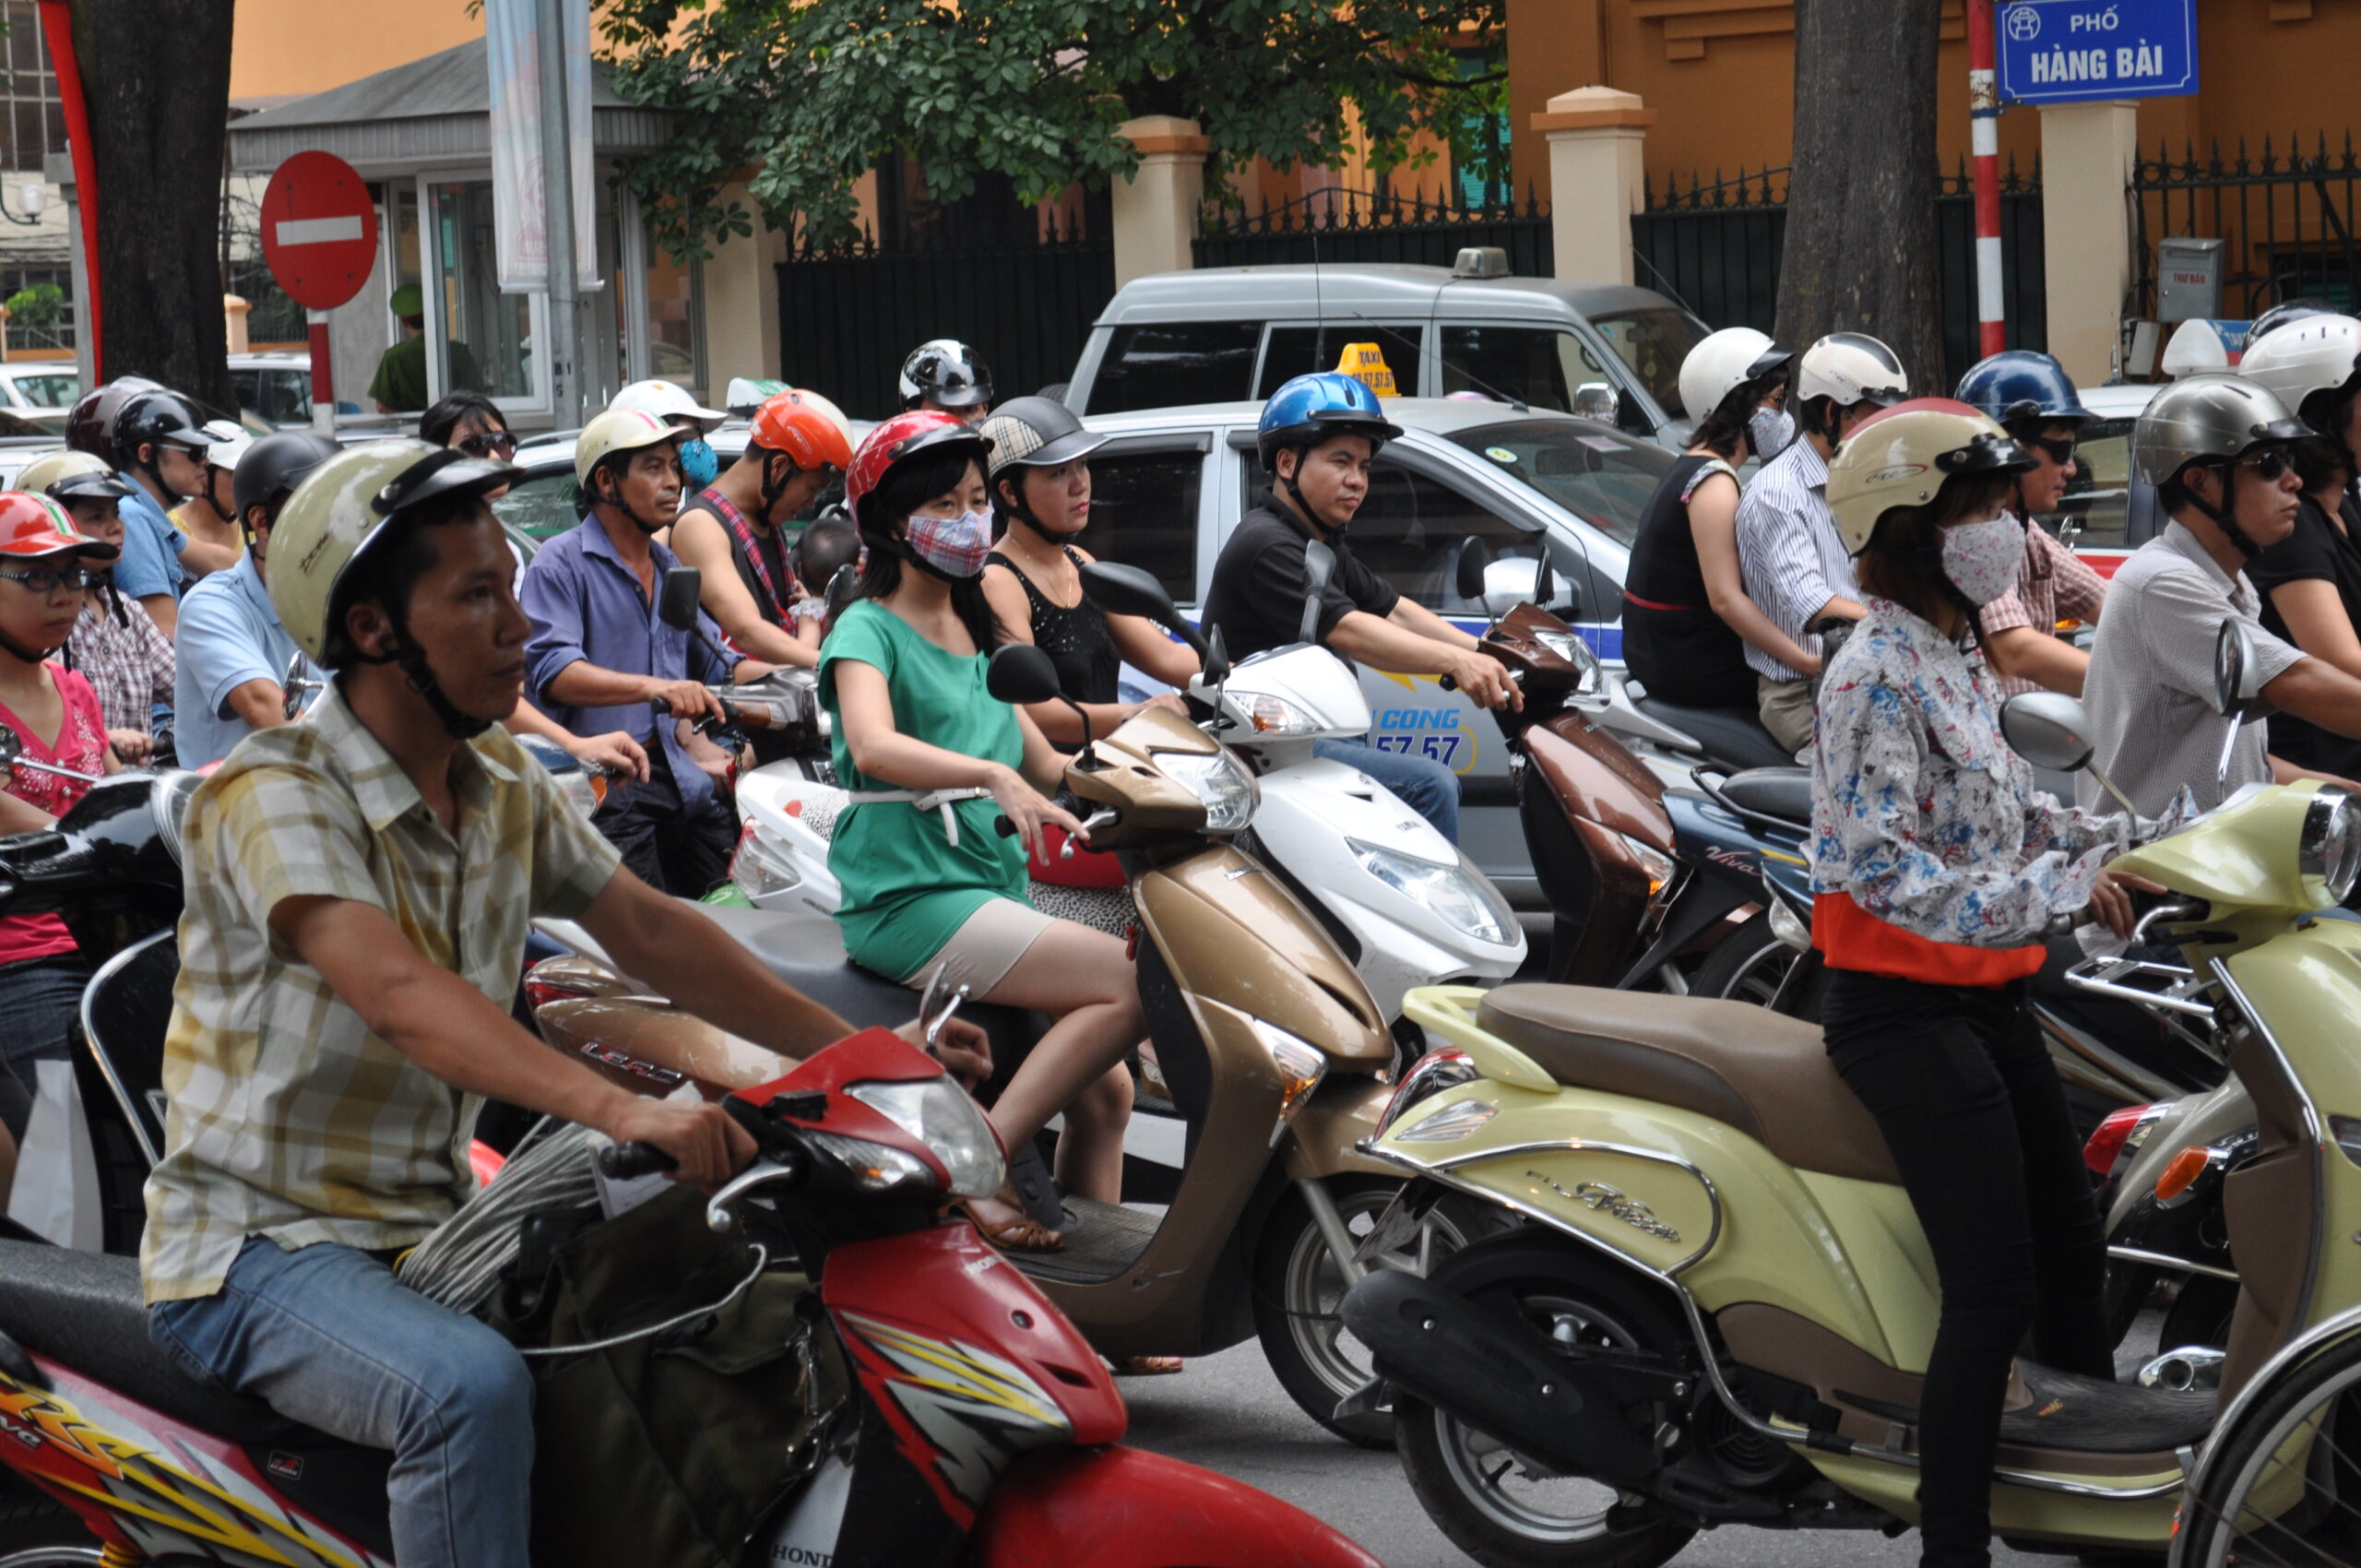 A crowd of motorcyclists on a Vietnamese street